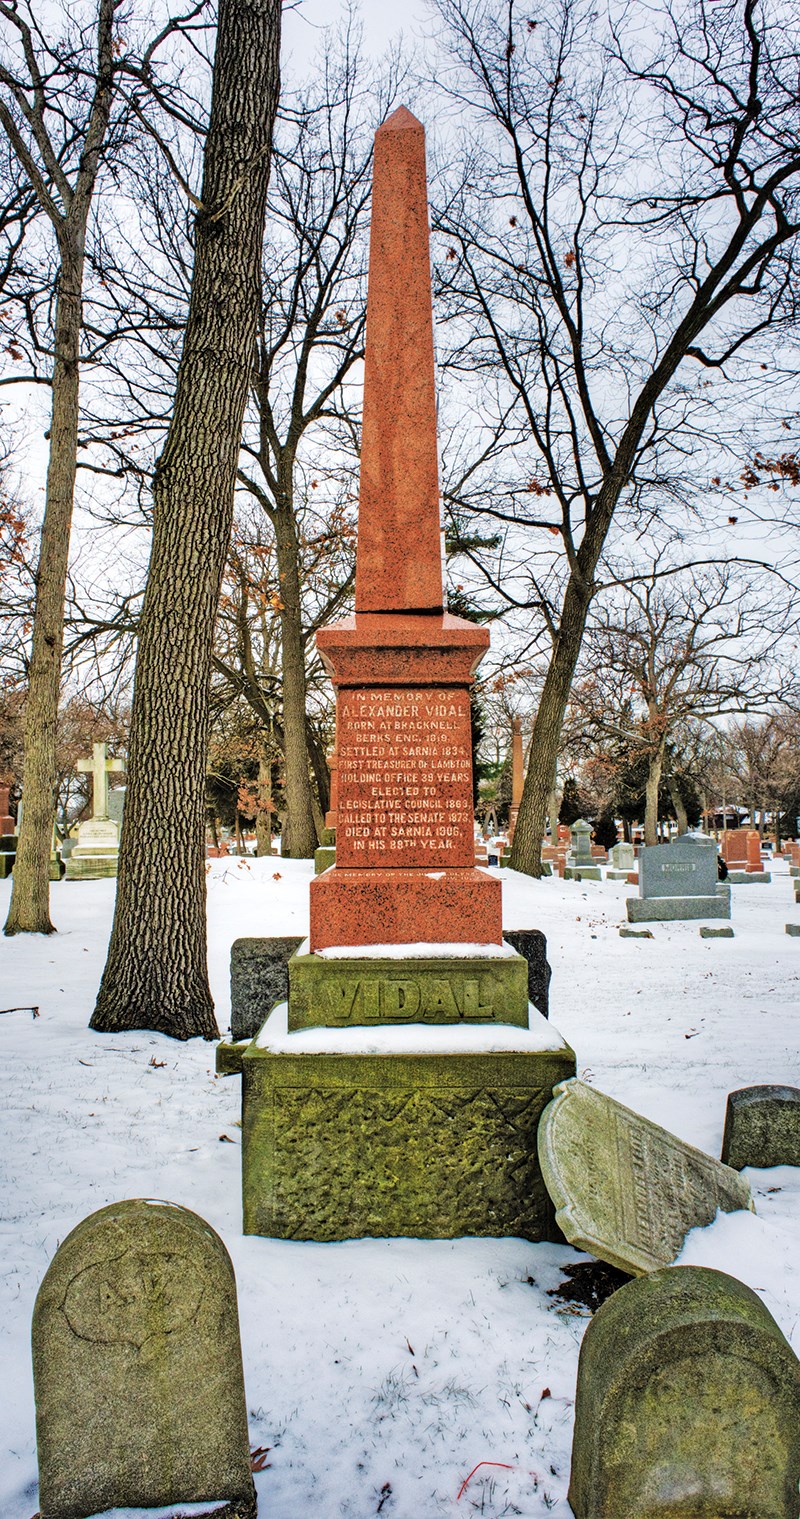 The grave of Alexander Vidal, who arrived in Sarnia in 1834 and became a politician and Canadian senator. Glenn Ogilvie